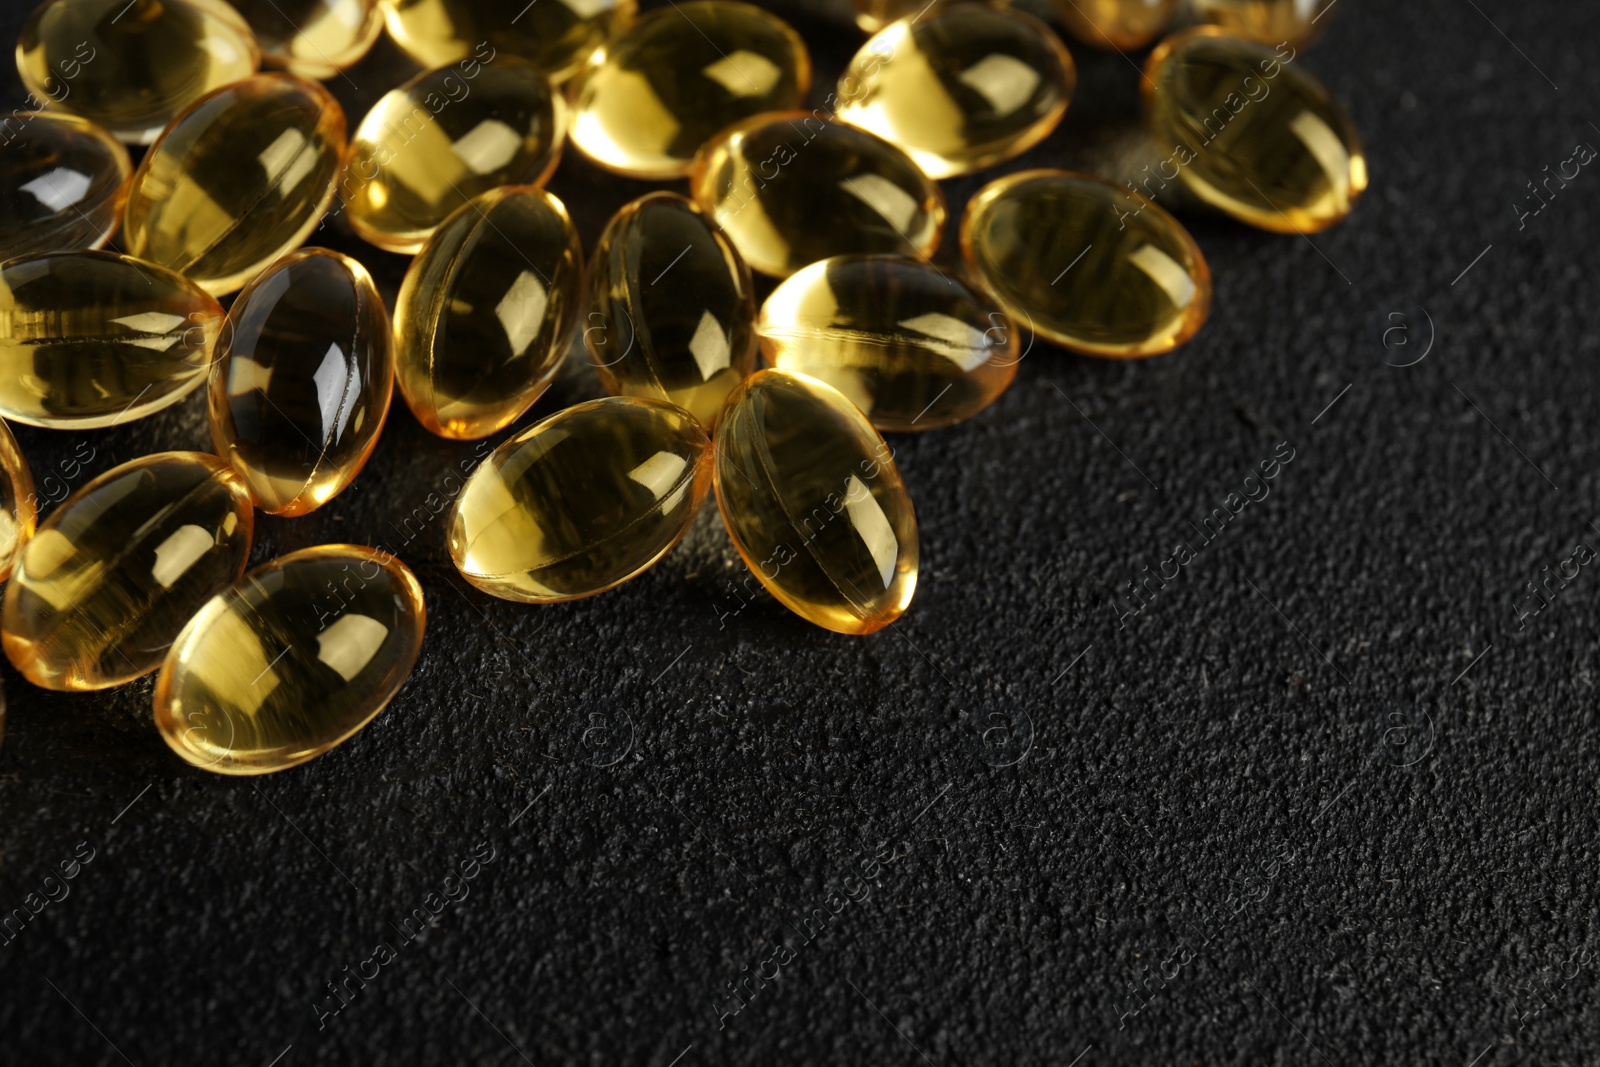 Photo of Cod liver oil pills and space for text on dark background, closeup